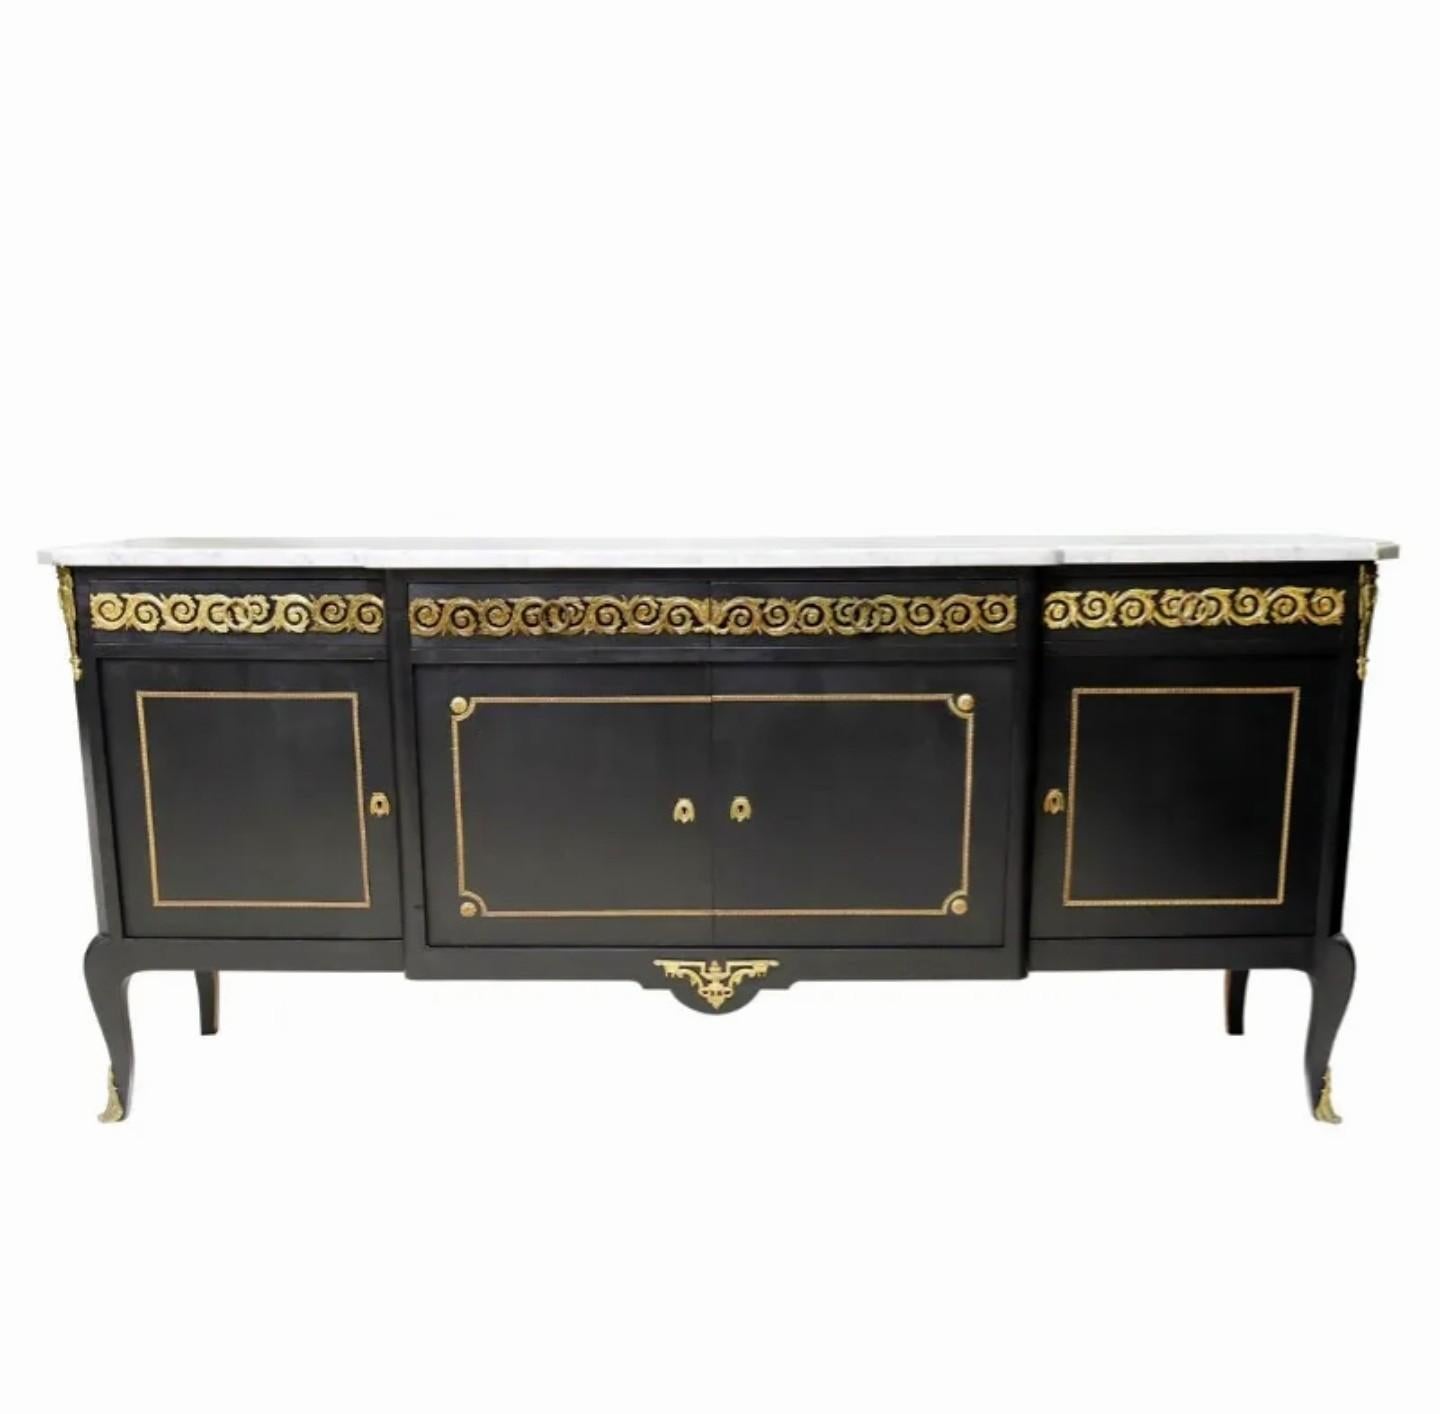 A spectacular French Louis XVI style ebonized sideboard in the manner of famous Parisian designer Maison Jansen, finely hand-crafted by NF Ameublement in France in the mid-20th century, having breakfront shaped marble top, over conforming case